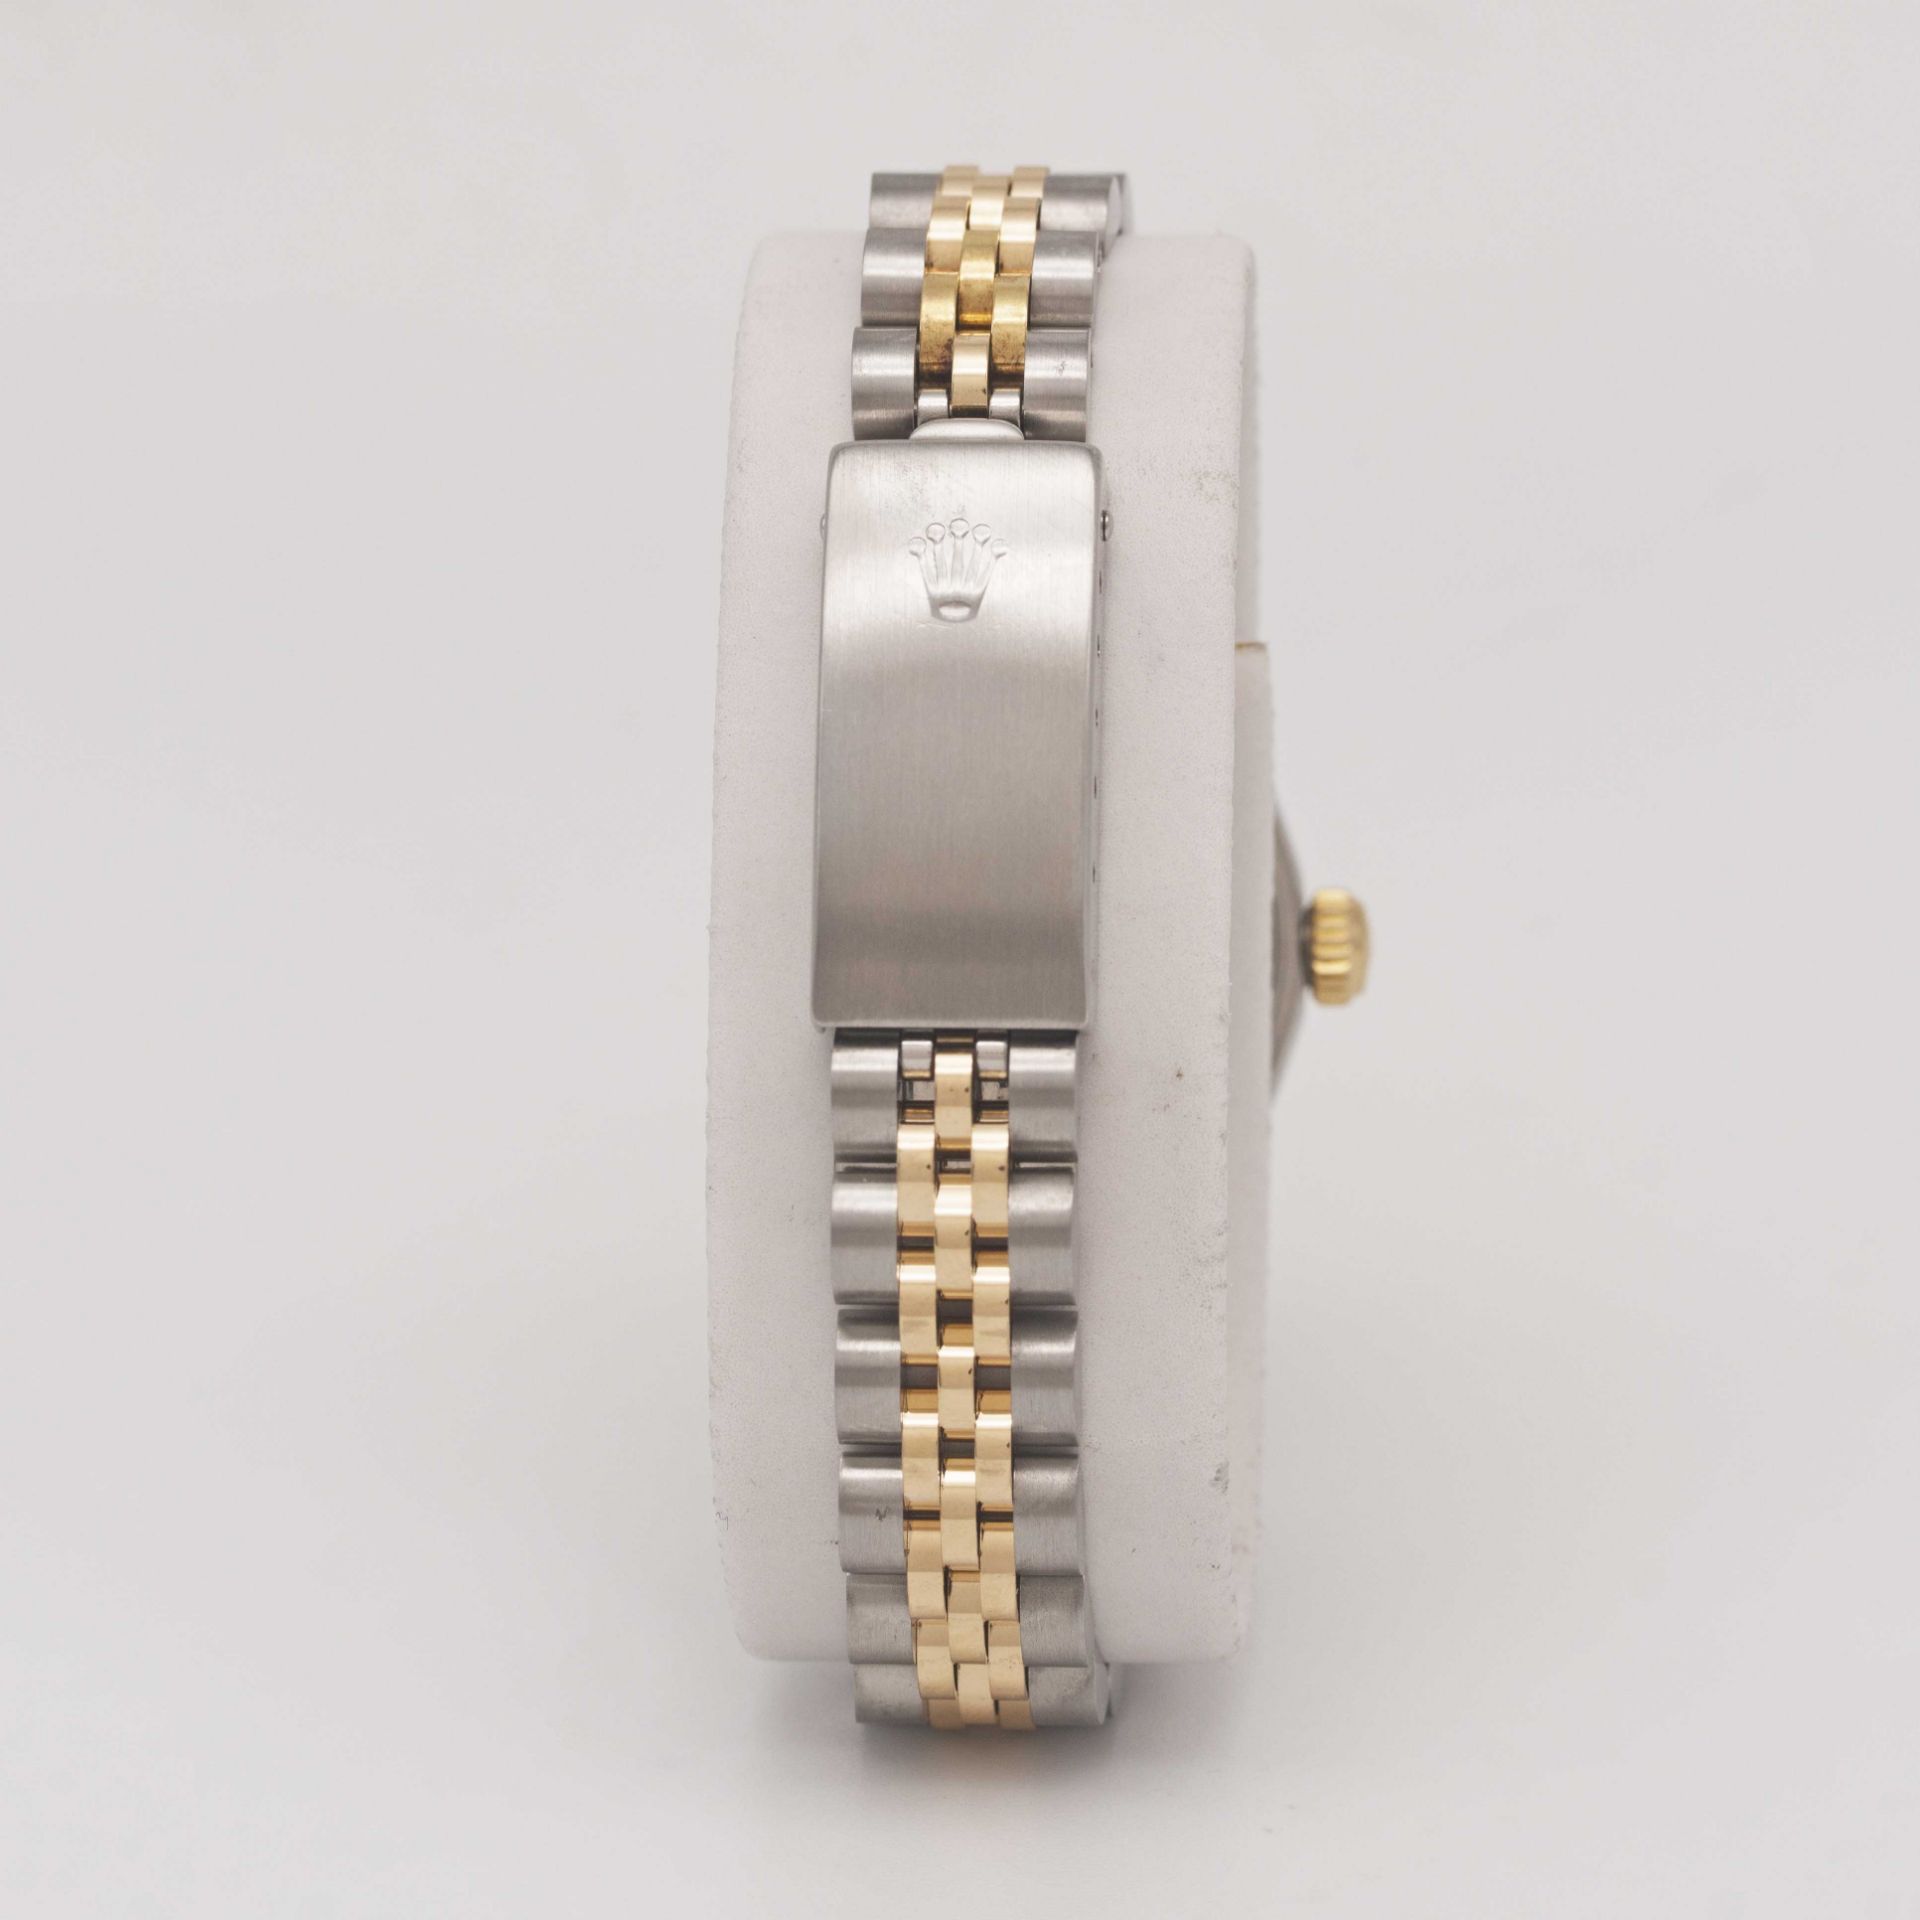 A LADIES STEEL & GOLD ROLEX OYSTER PERPETUAL DATEJUST BRACELET WATCH CIRCA 2000, REF. 69173 WITH - Image 5 of 12